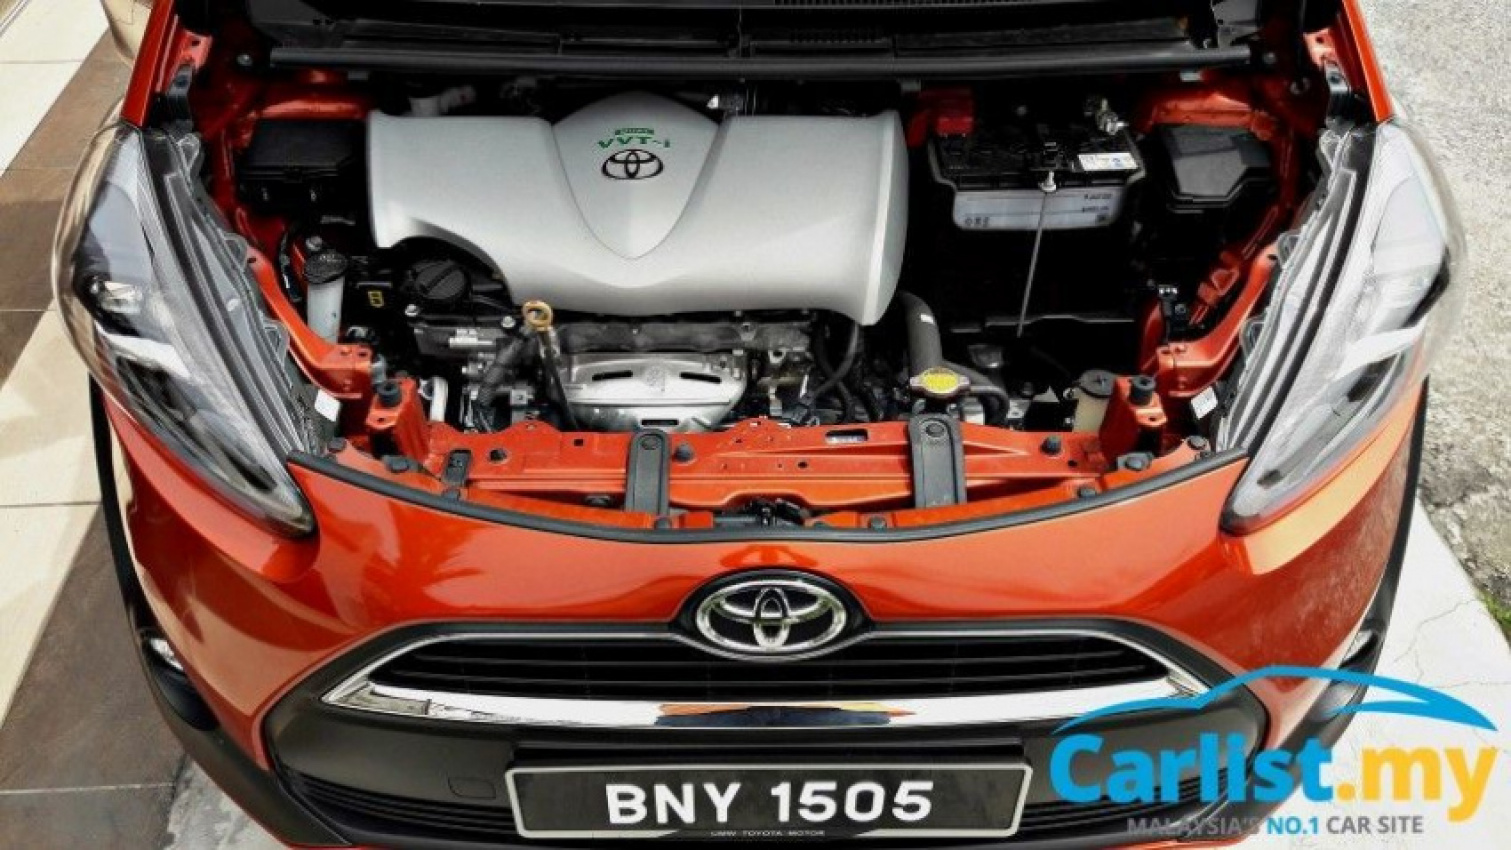 autos, cars, reviews, toyota, 2016 toyota sienta, sienta, toyota sienta, toyota sienta review, toyota sienta review malaysia, review: 2016 toyota sienta 1.5v – let there be excitement for once